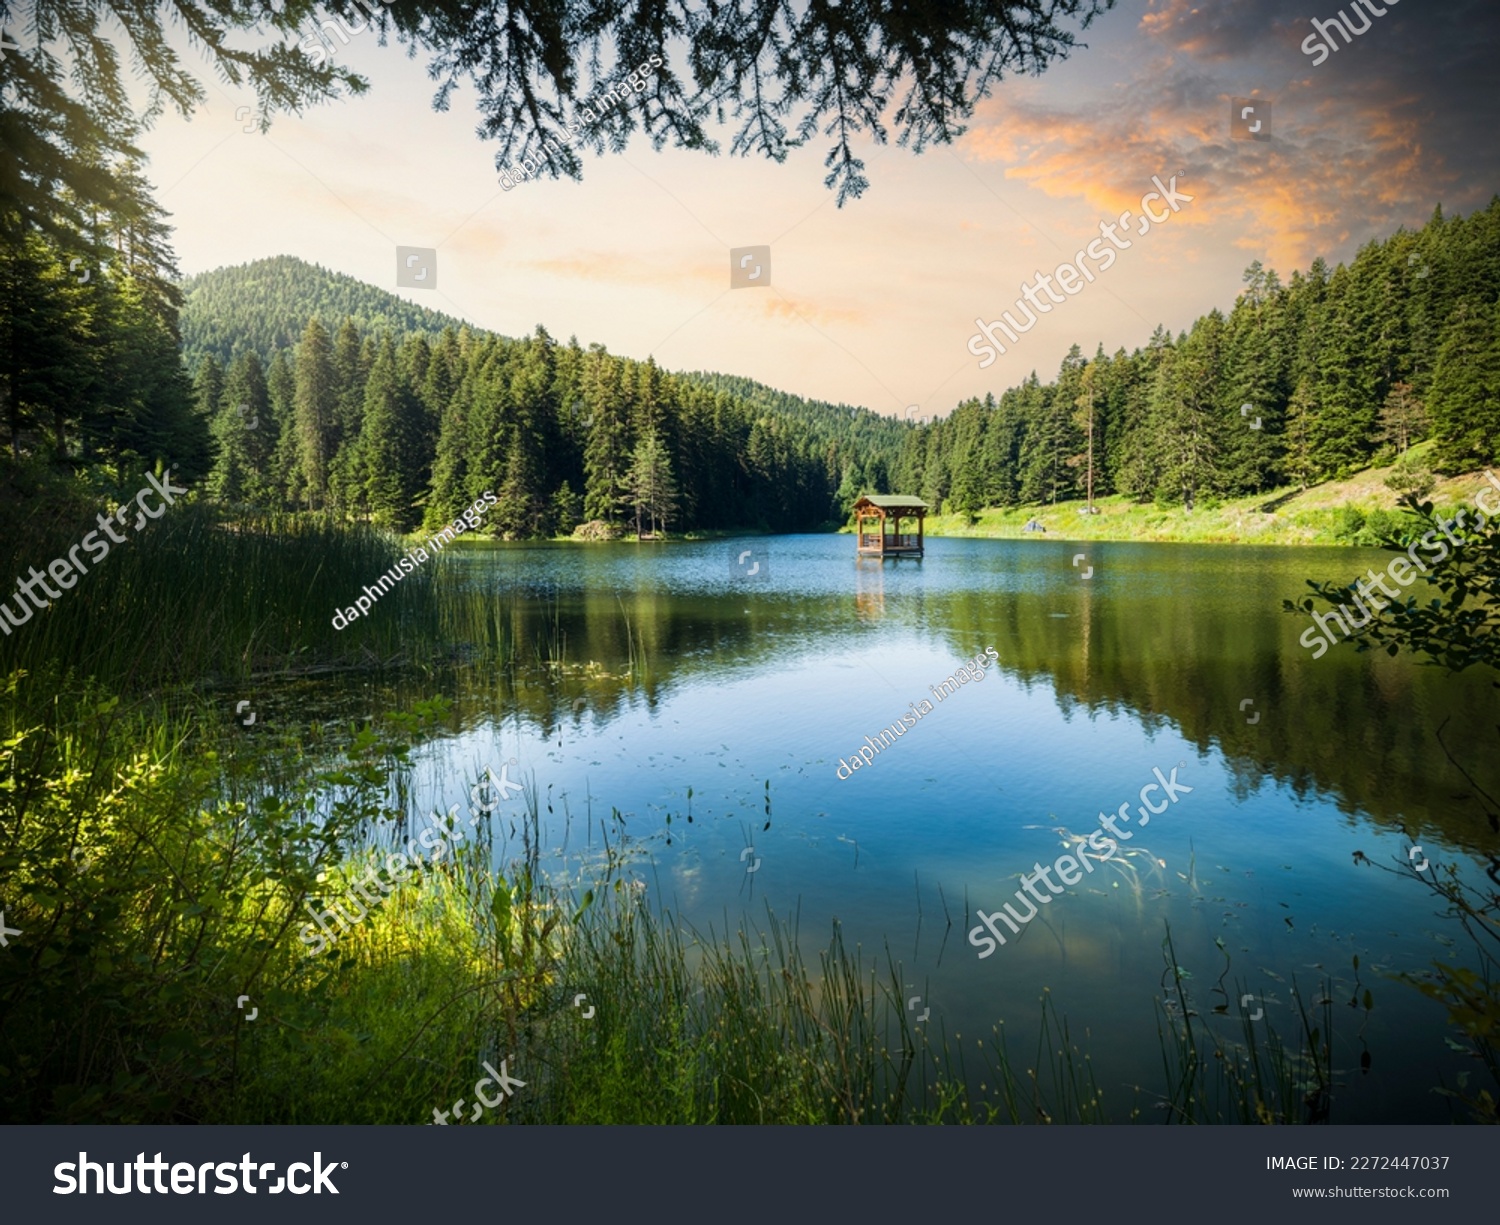 A wonderful view of the lake at sunrise. Shiin mountain lake in camping and picnic area. Spring season nature background #2272447037